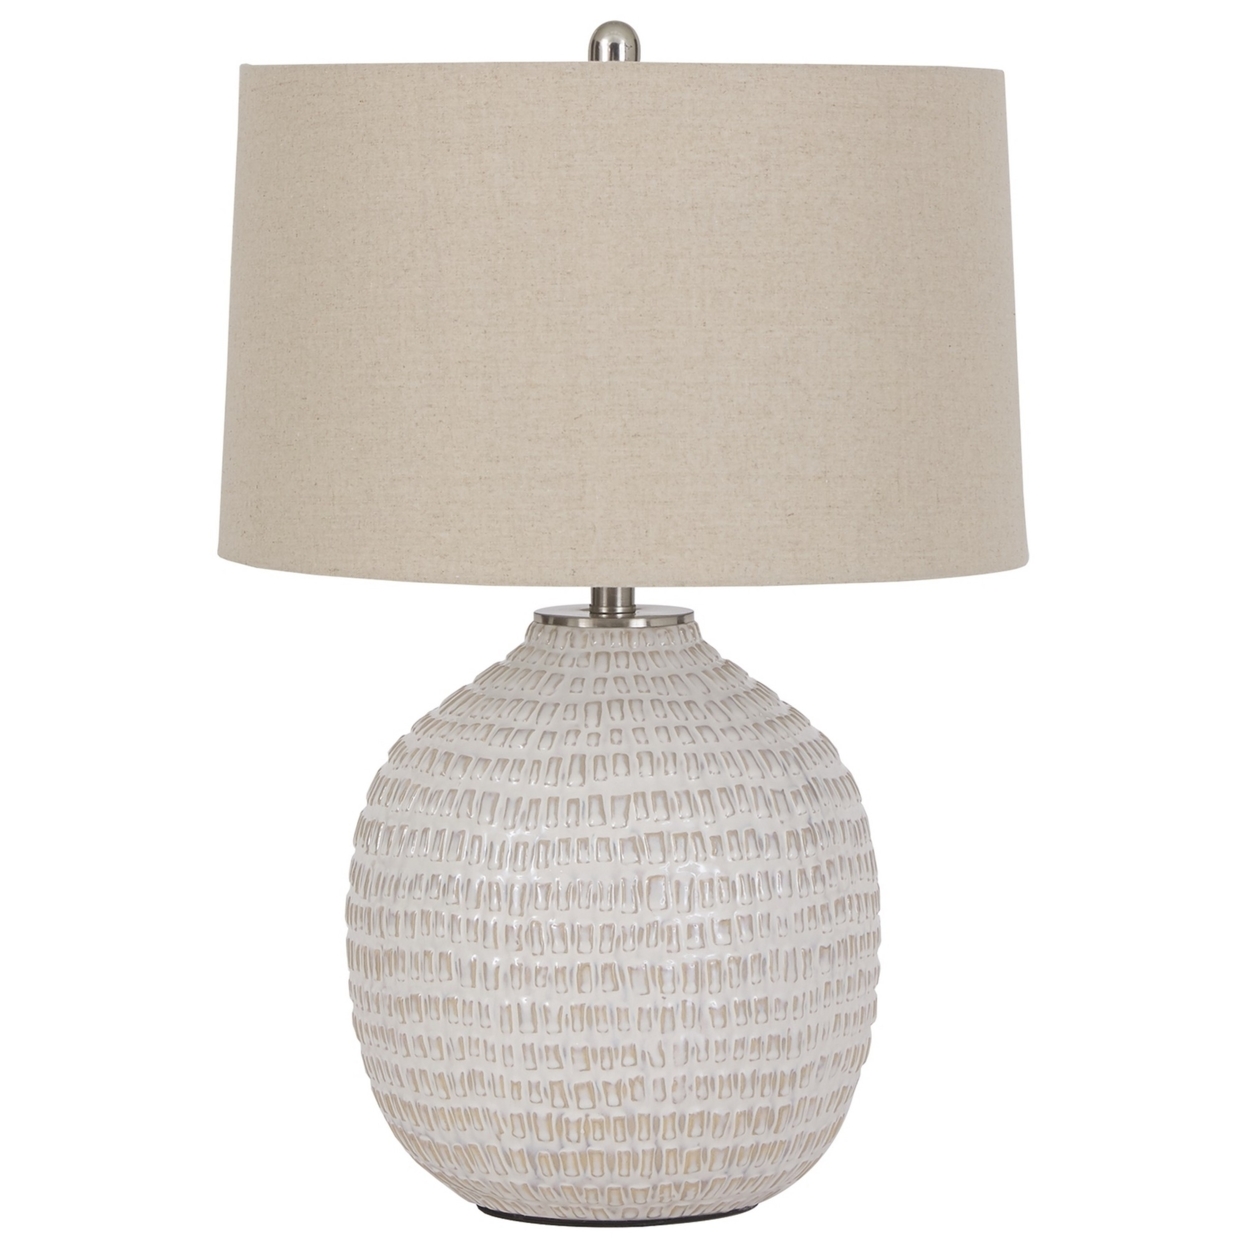 Textured Ceramic Frame Table Lamp With Fabric Shade, Beige And White- Saltoro Sherpi